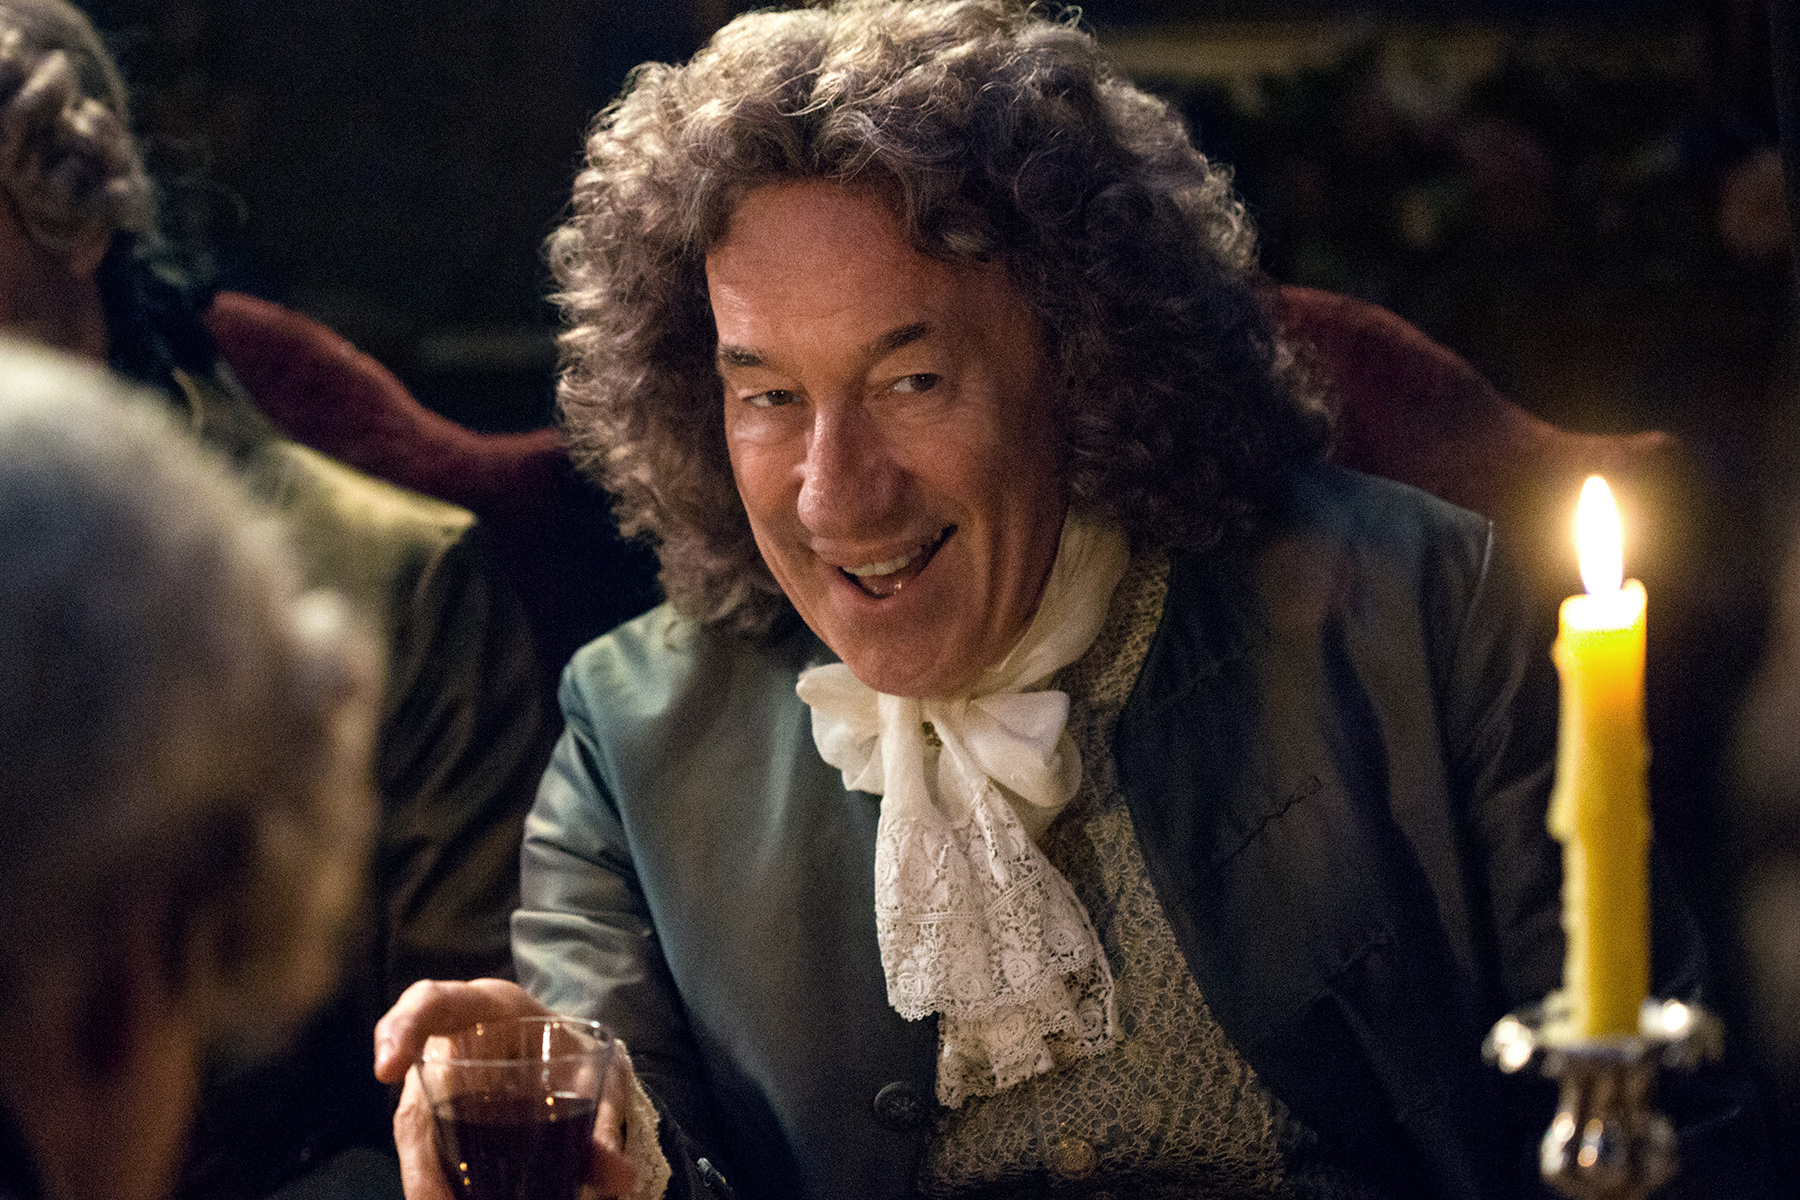 The Duke of Sandringham (Simon Callow) looking just as pleased with dinner party shenanigans as I am.